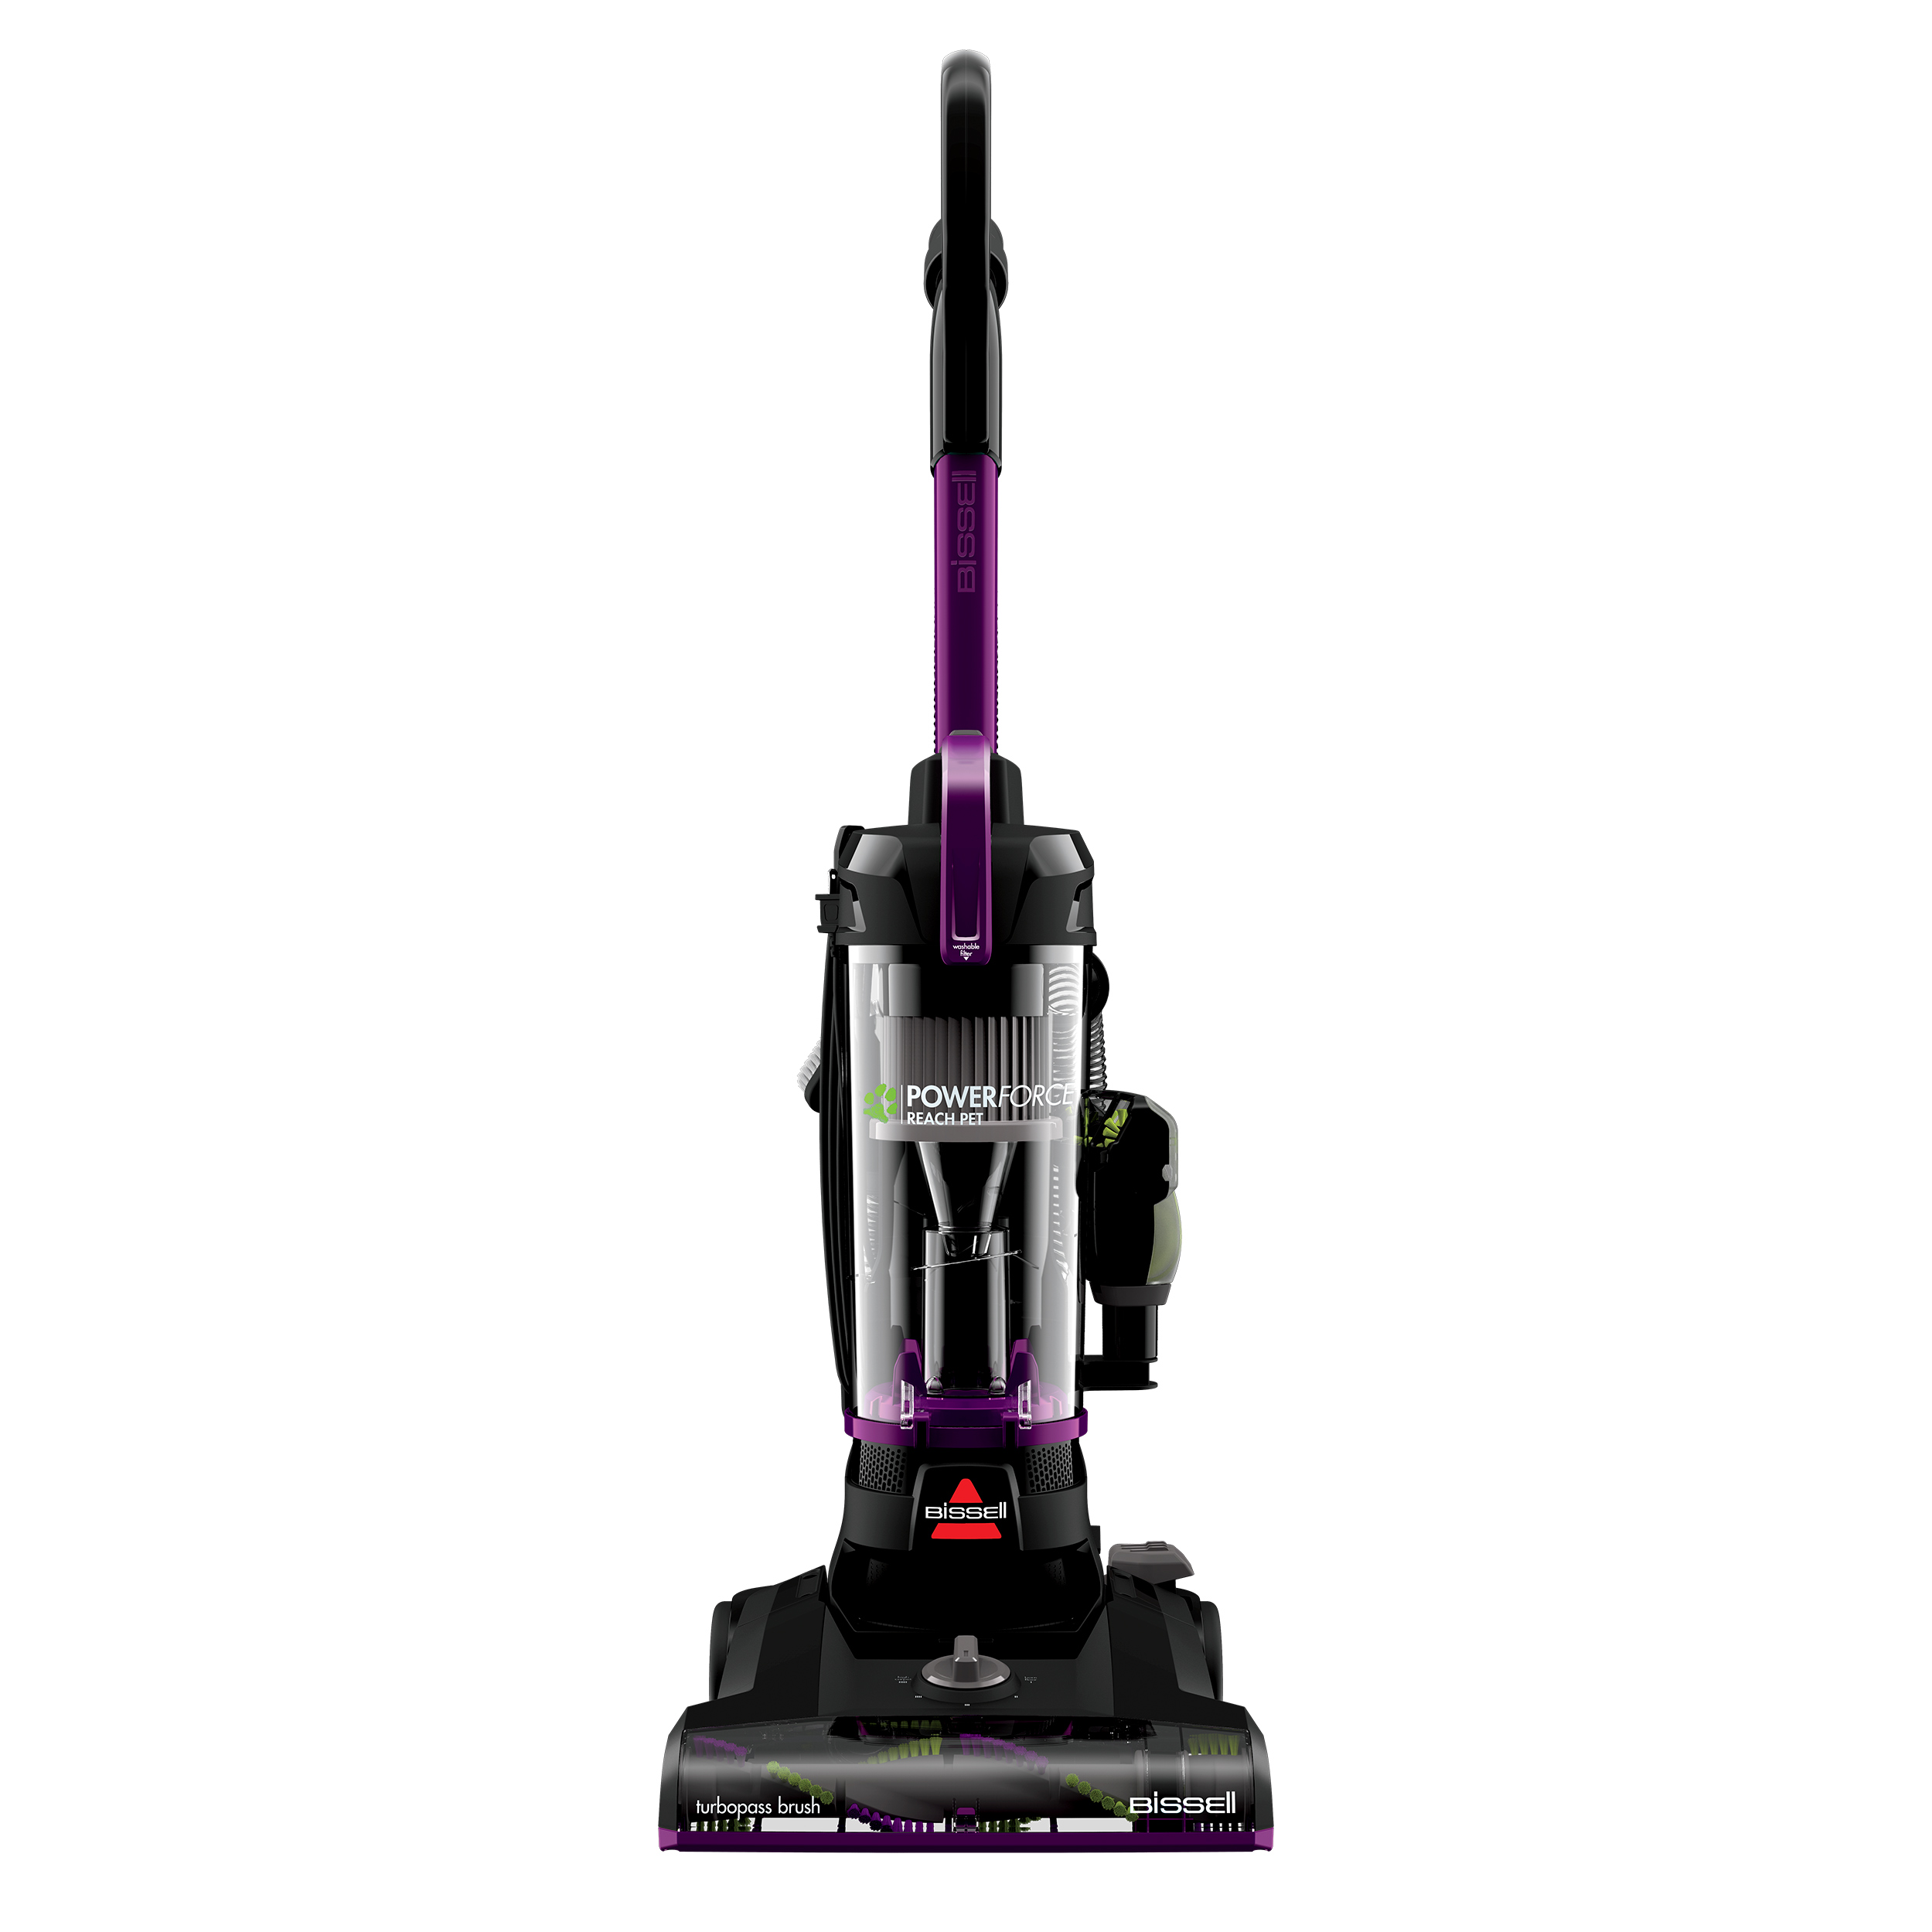 BISSELL Power Force Helix Pet Deluxe Bagless Upright Vacuum with Live Wand 3334 - image 1 of 7